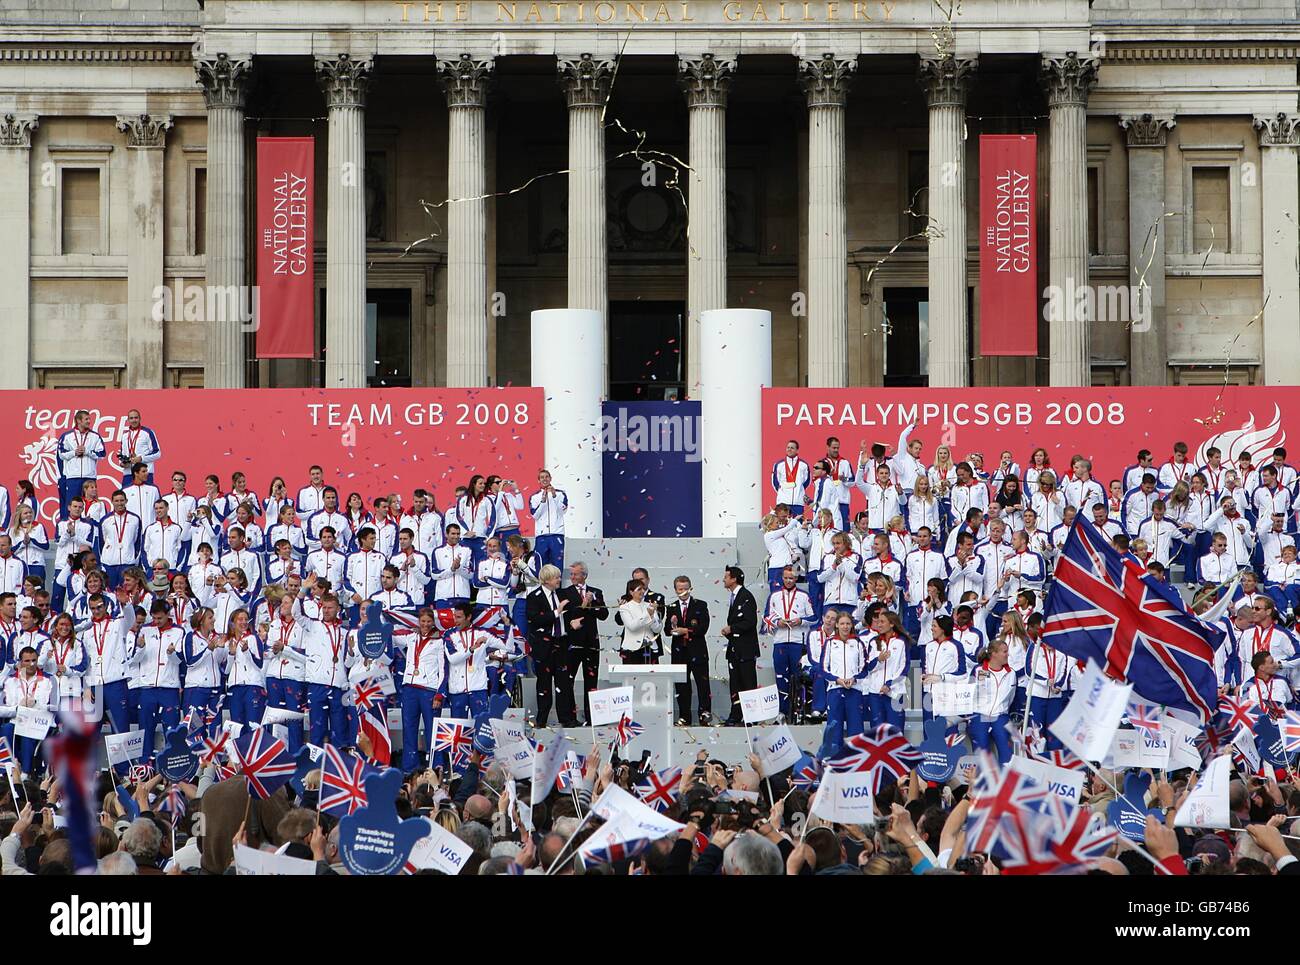 Confetti rains down on the crowd as celebrations draw to a close during the Team GB homecoming Parade in Central London Stock Photo